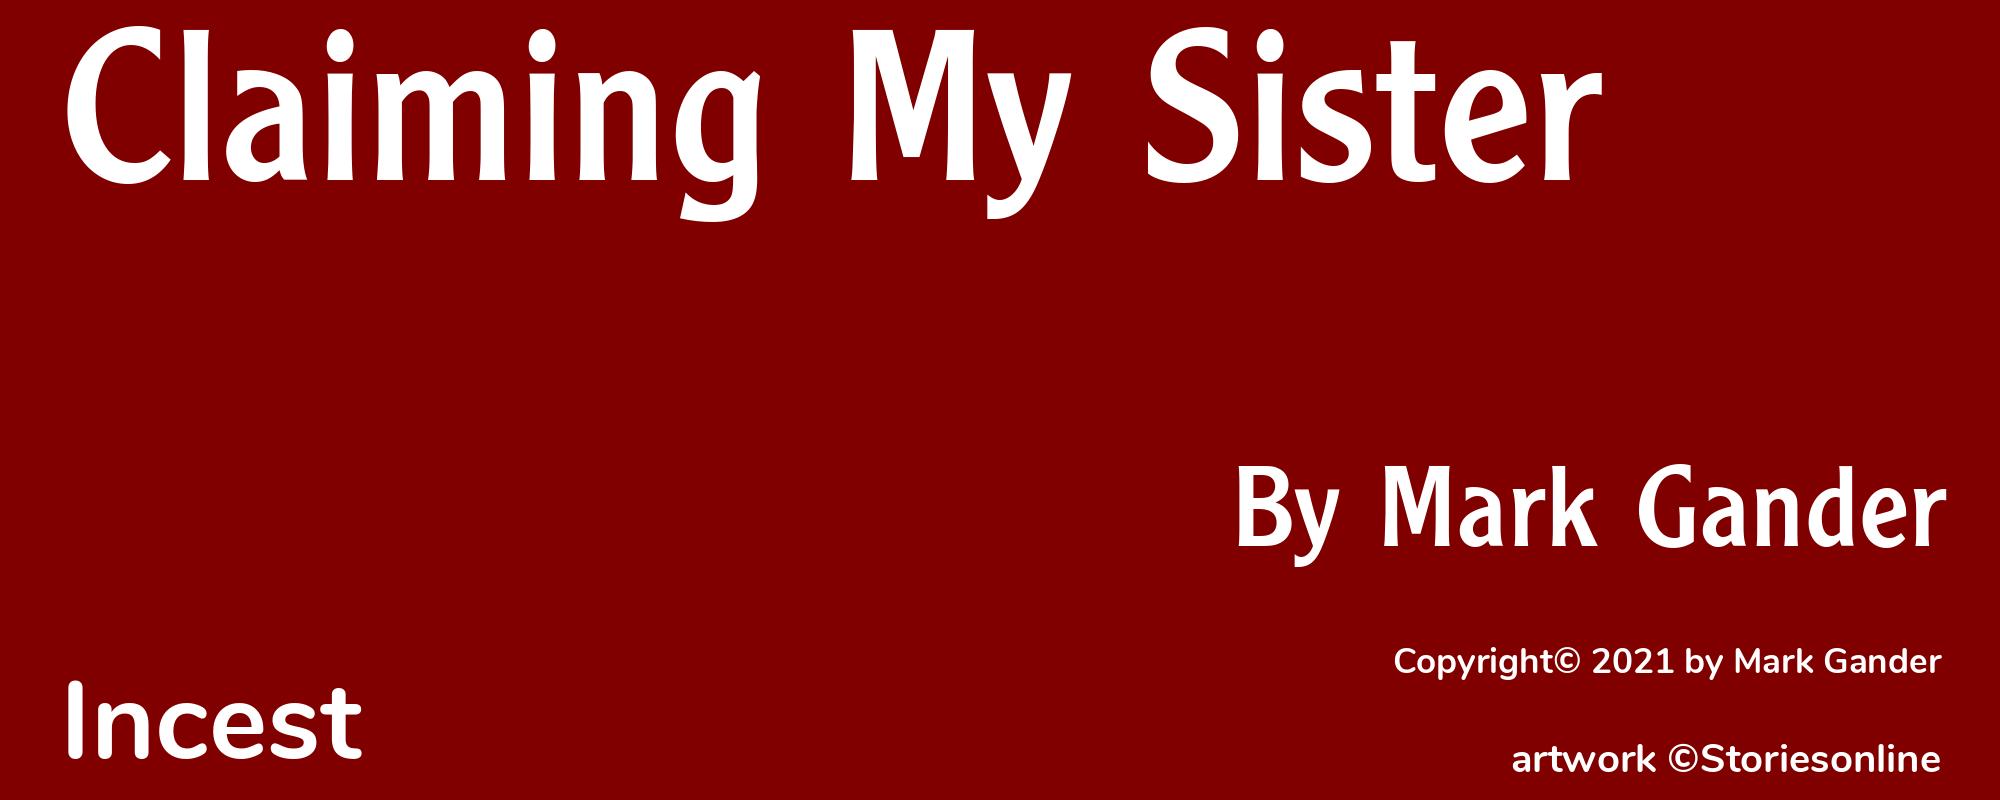 Claiming My Sister - Cover